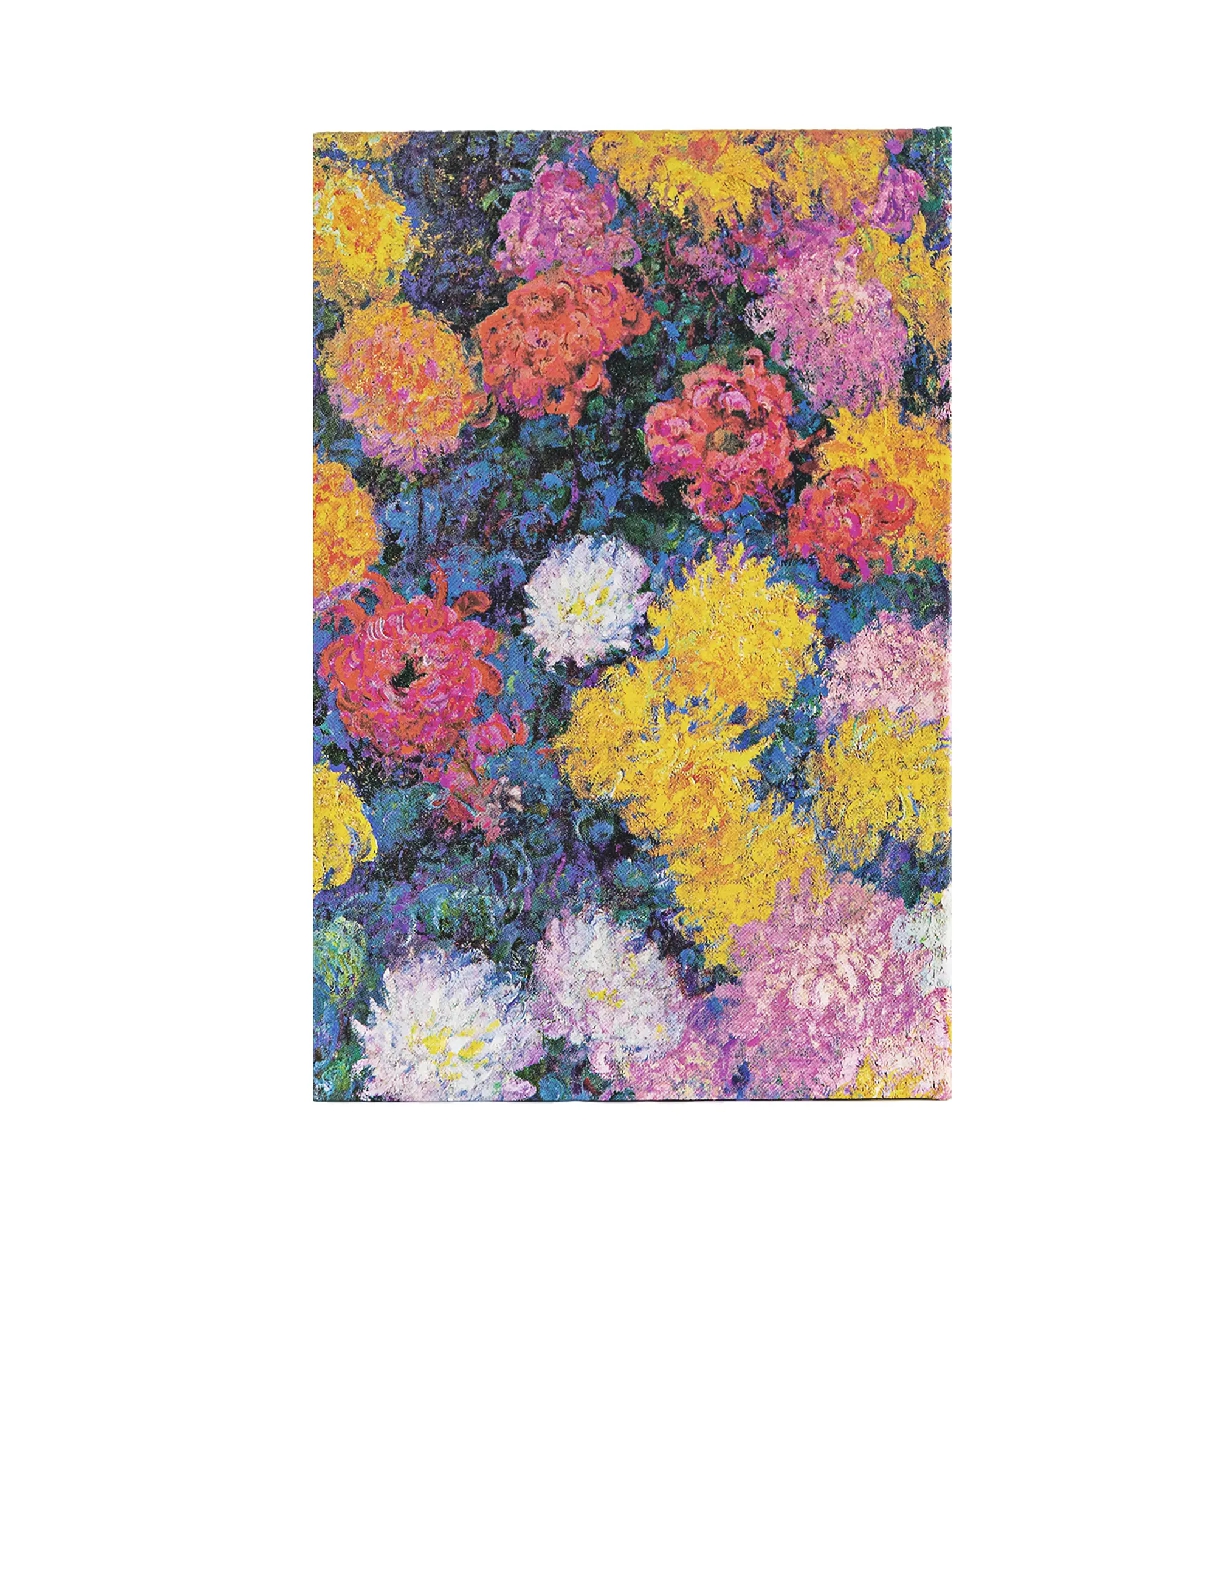 Monet's Chrysanthemums, Hardcover Journals, Mini, Unlined, Elastic Band, 176 Pg, 85 GSM